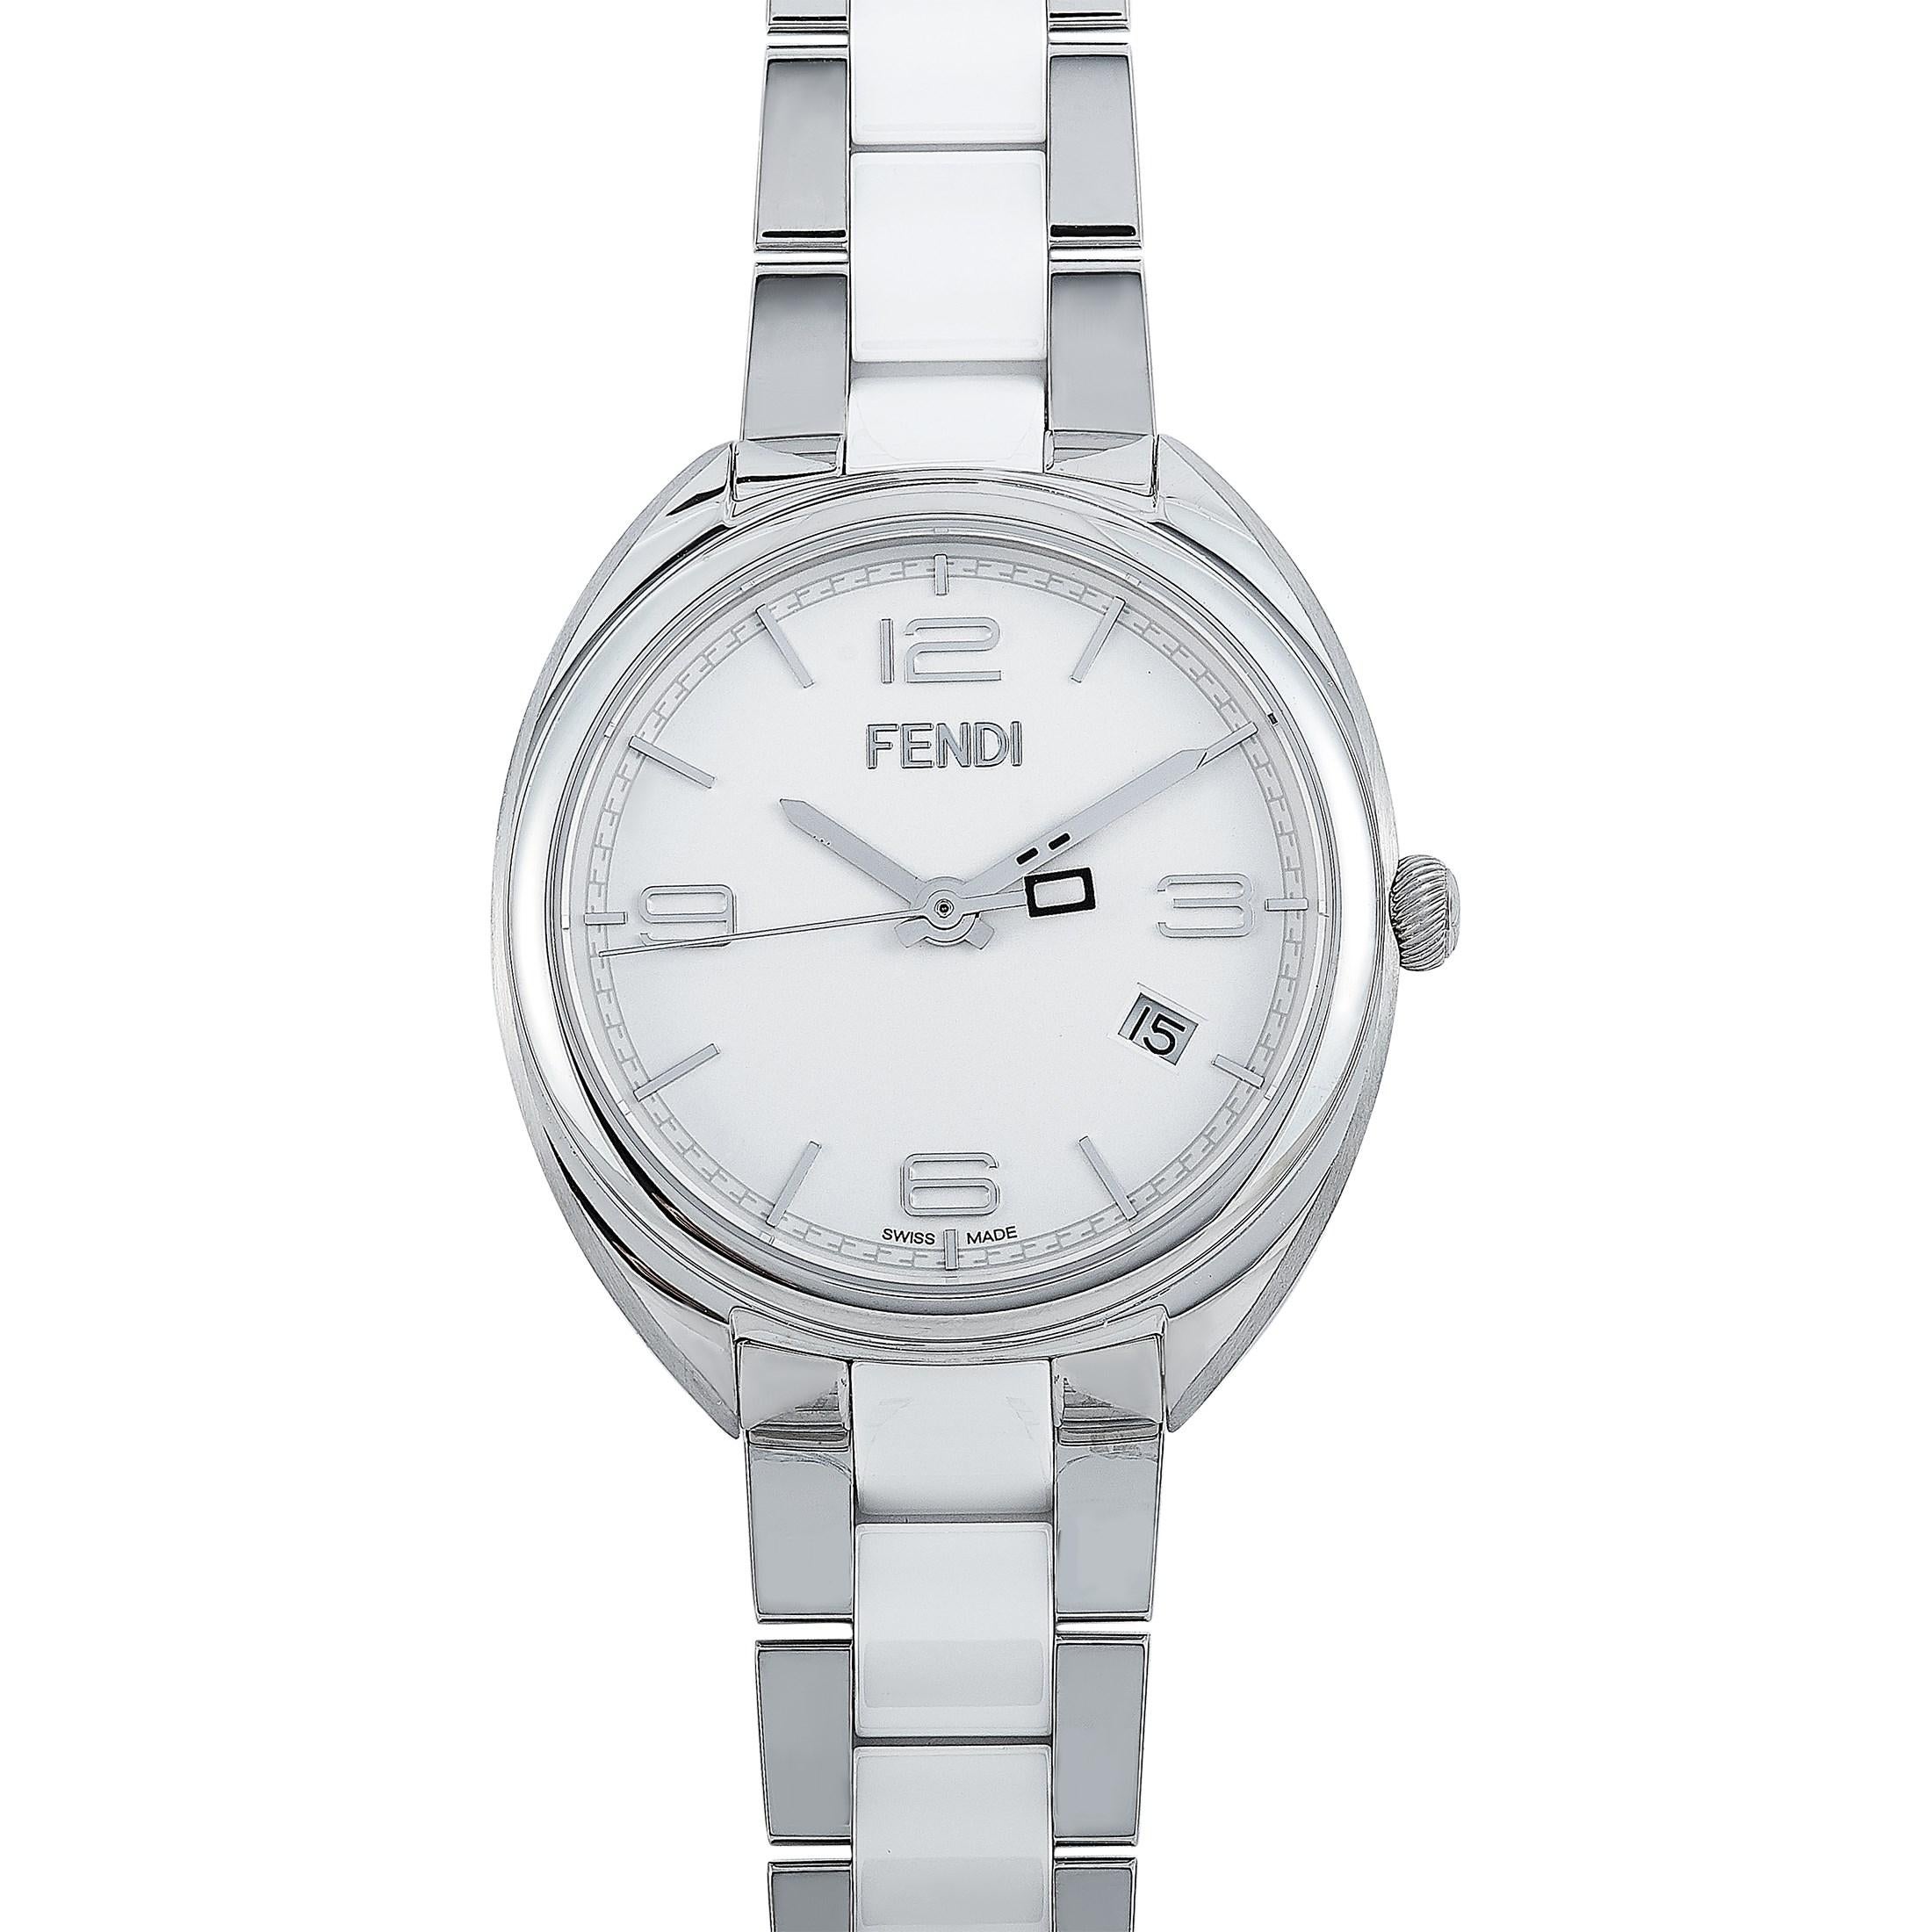 This is the Fendi Momento watch, reference number F211034004.

It is presented with a 34 mm stainless steel case that offers water resistance of 100 meters. The watch is worn on a stainless steel and white ceramic bracelet. The white dial with four